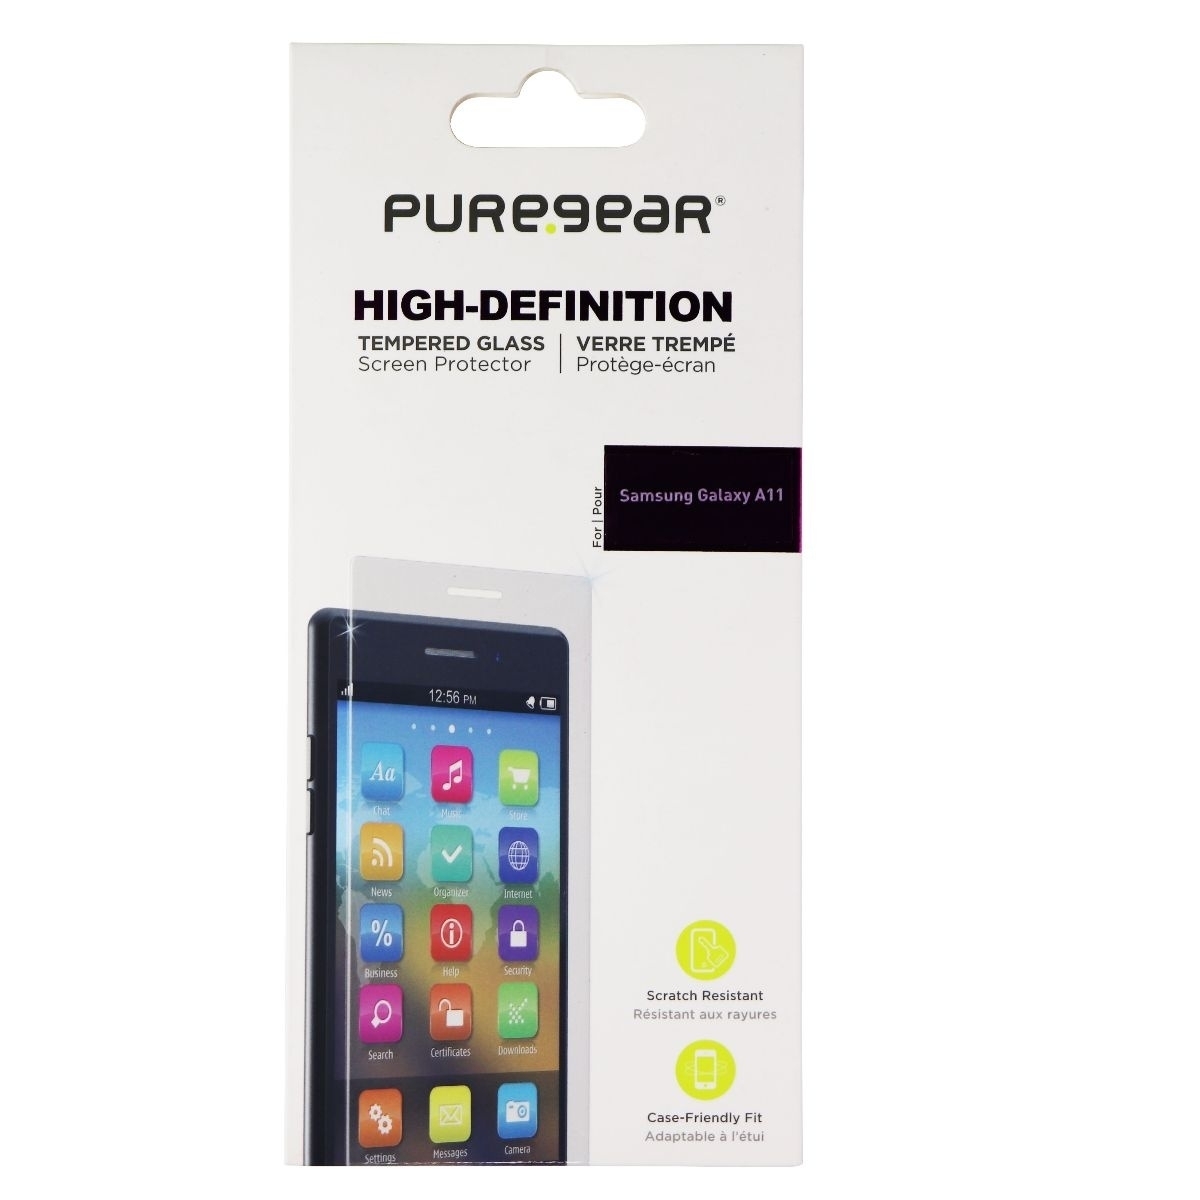 PureGear High-Definition Tempered Glass For Samsung Galaxy A11 - Clear